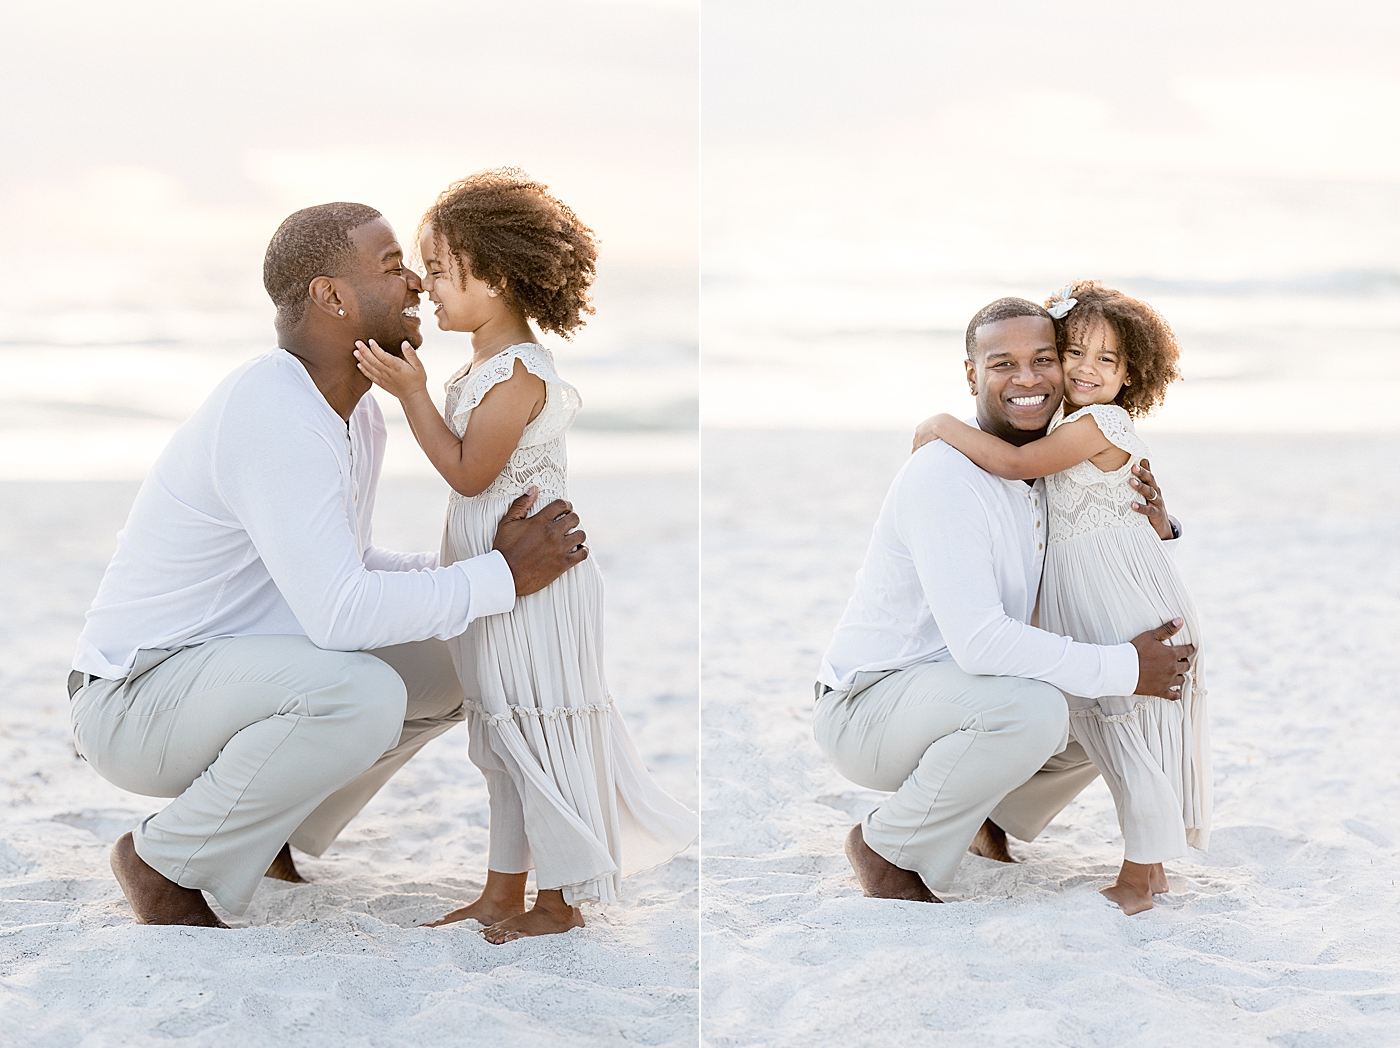 Dad with his little girl on the beach. Photo by Brittany Elise Photography.